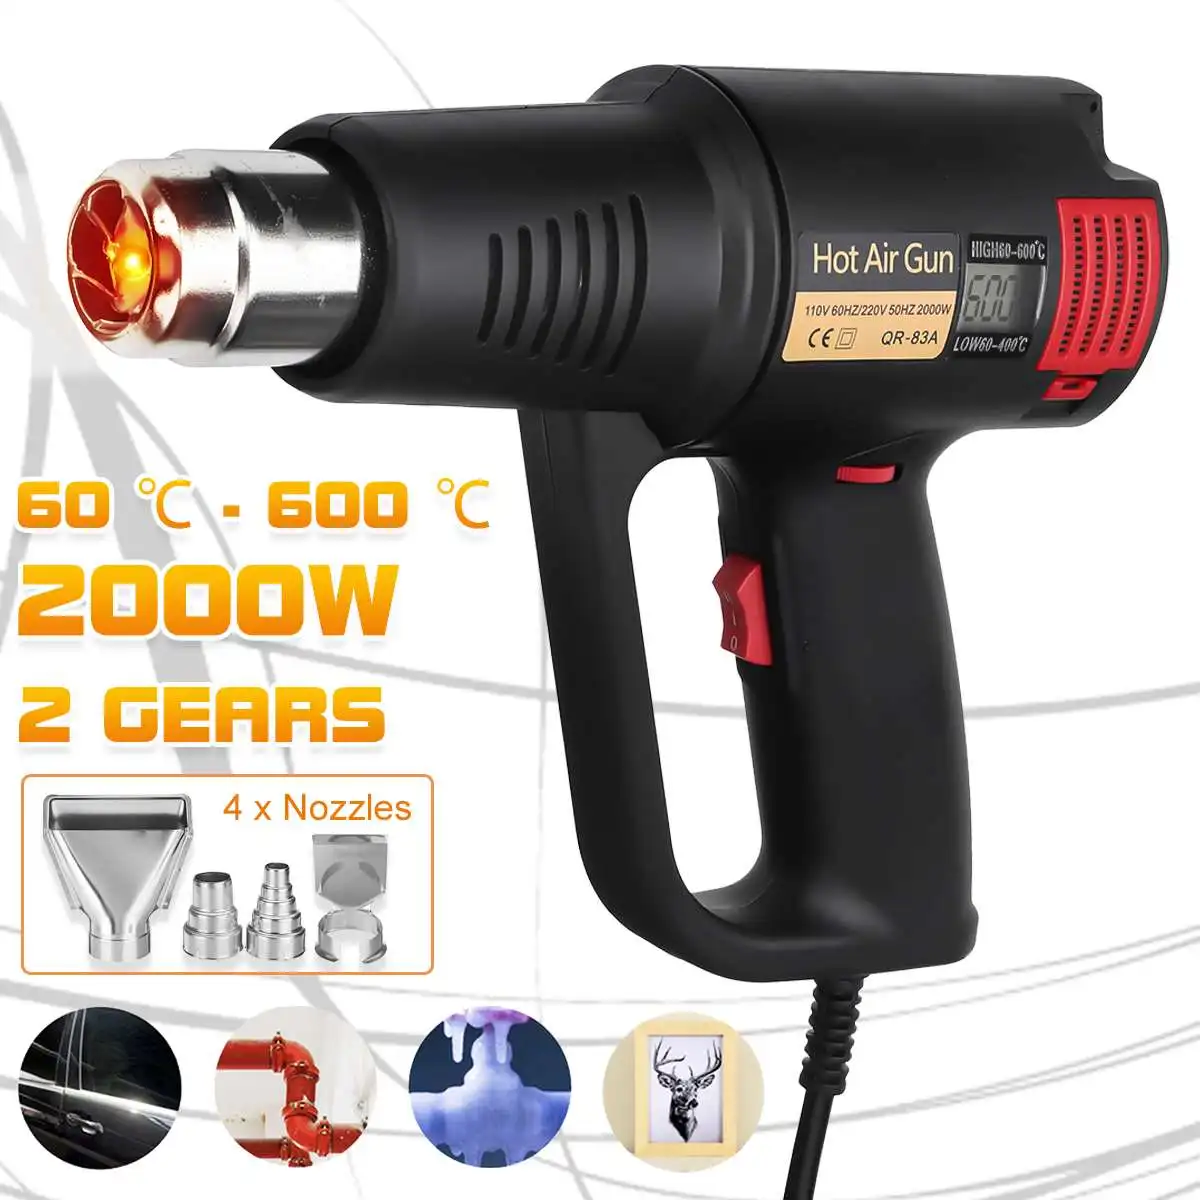 

2000W 2 Gears Electric Hot Air Gun Thermoregulator Digital display Heat Gun Shrink Wrapping Thermal Blower Dryer For Soldering